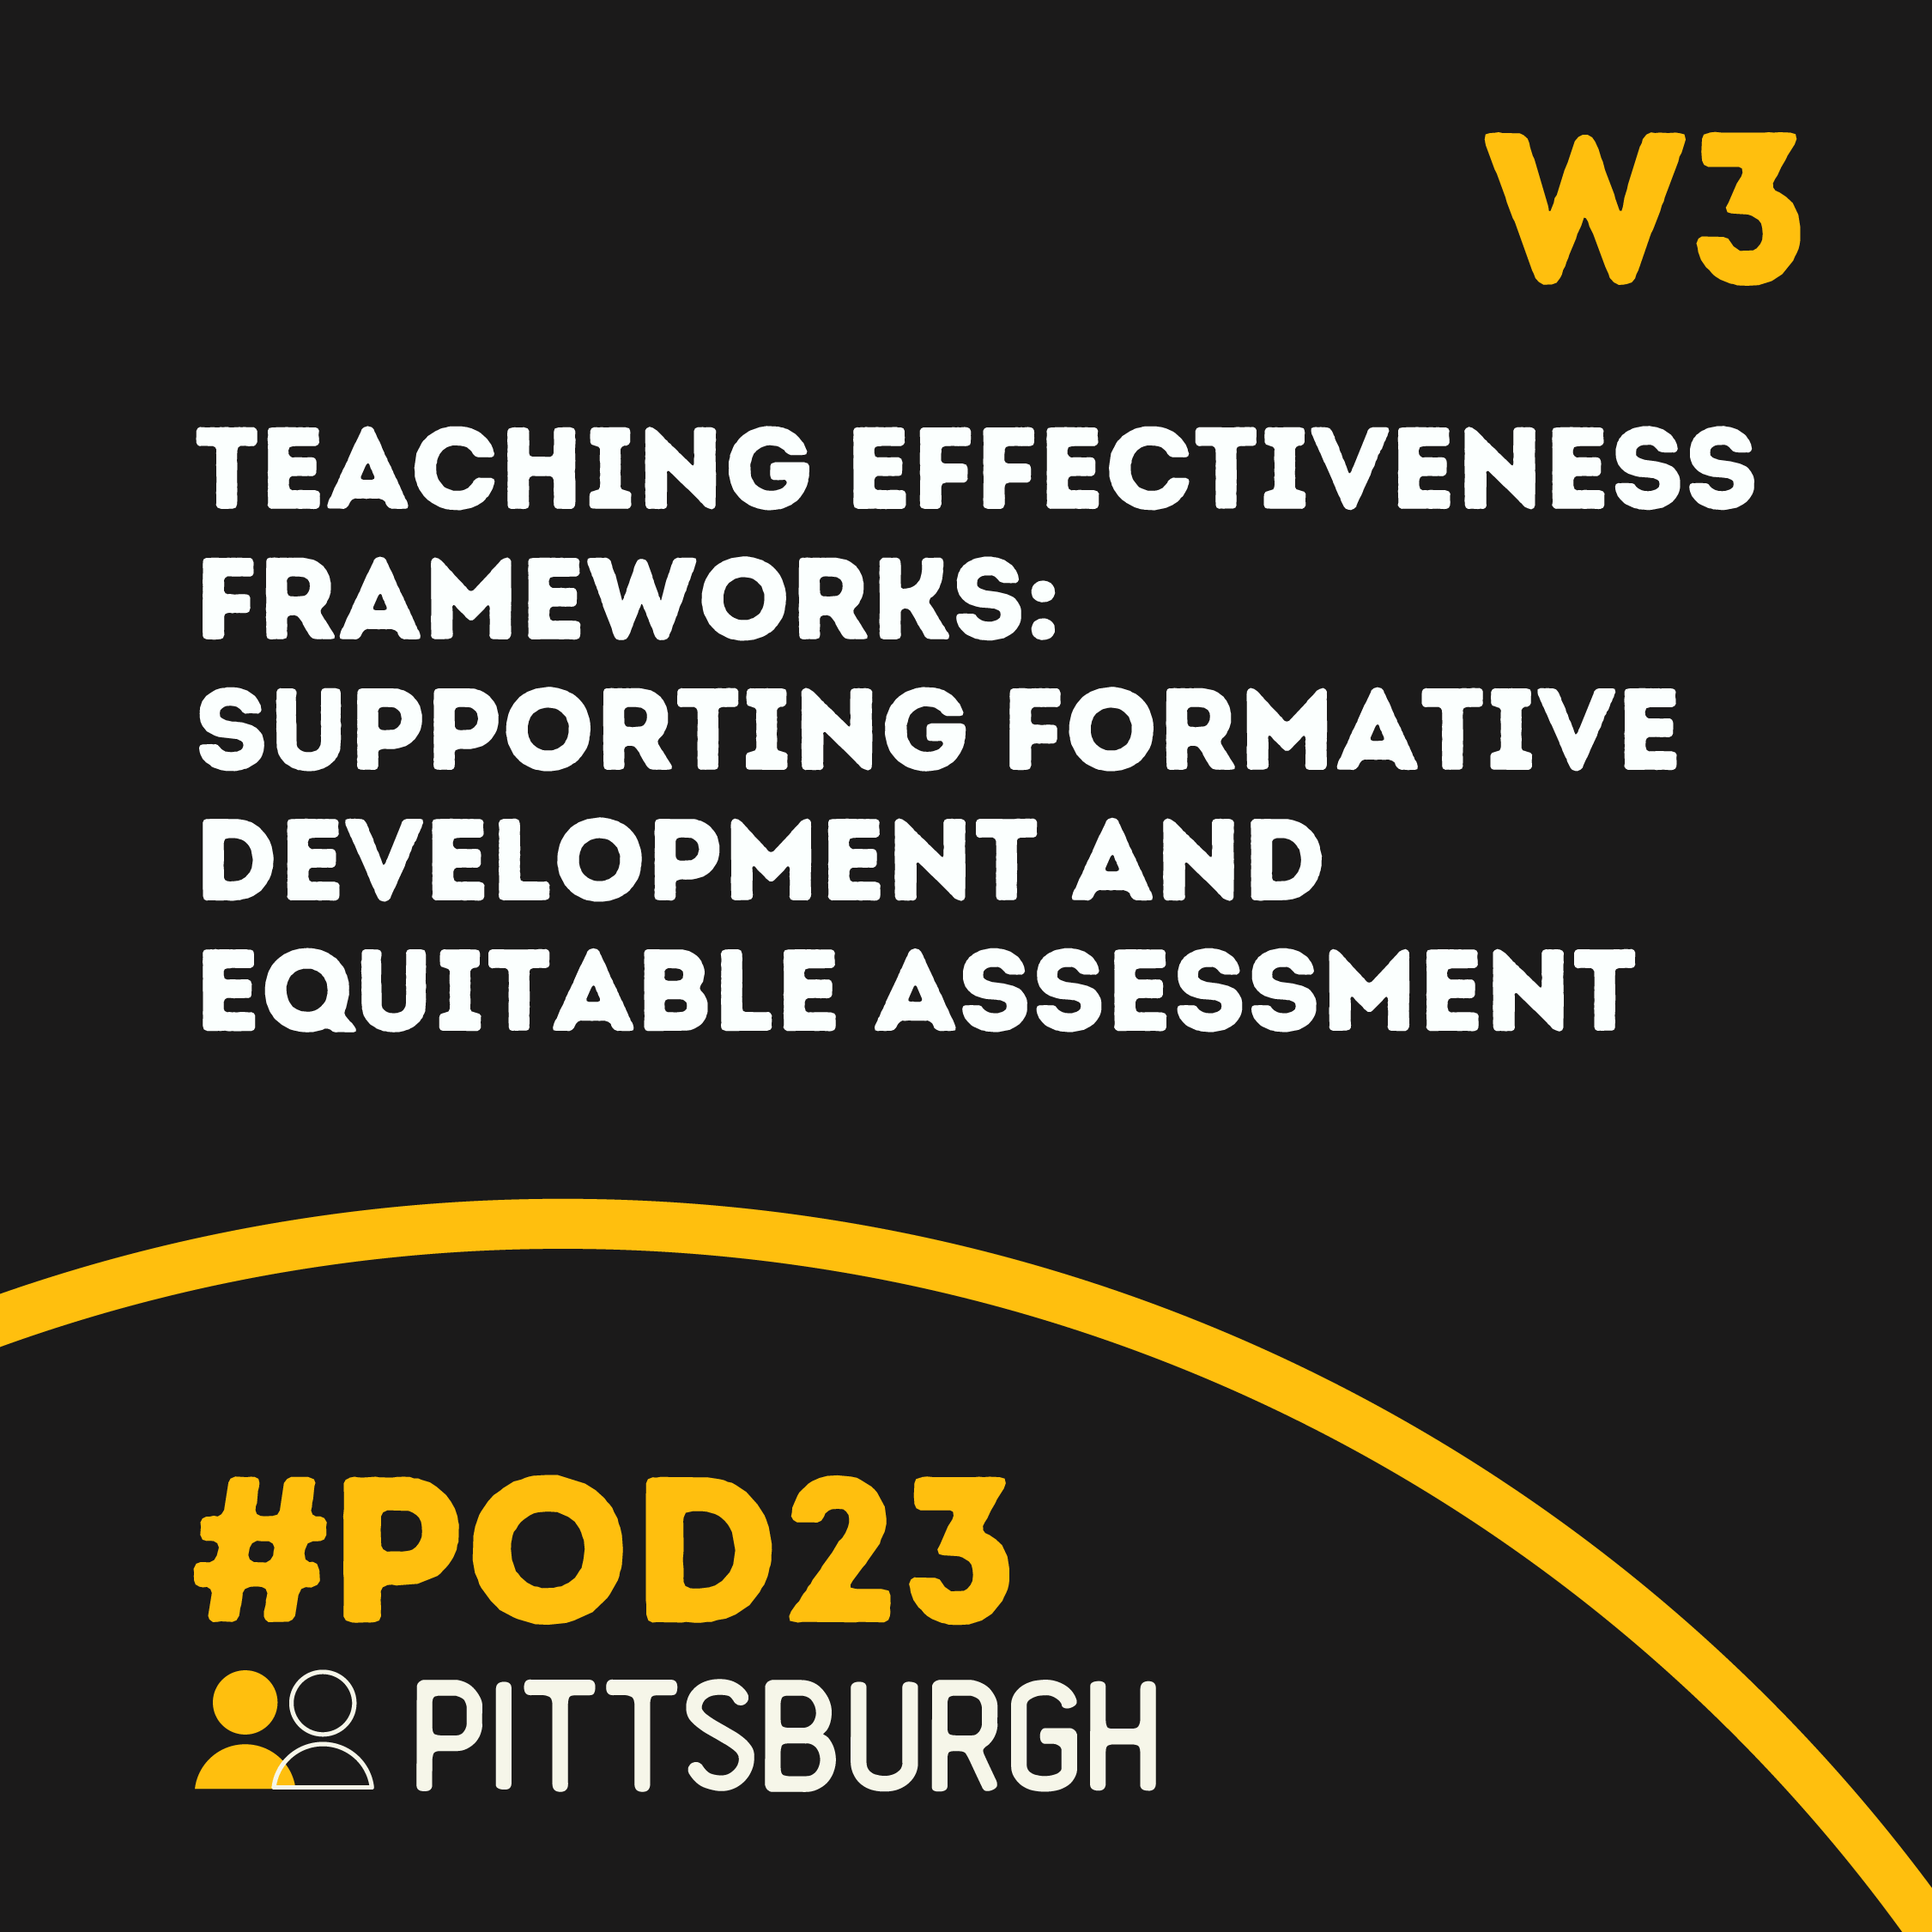 #POD23 W3: Teaching Effectiveness Frameworks: Supporting Formative Development and Equitable Assessment